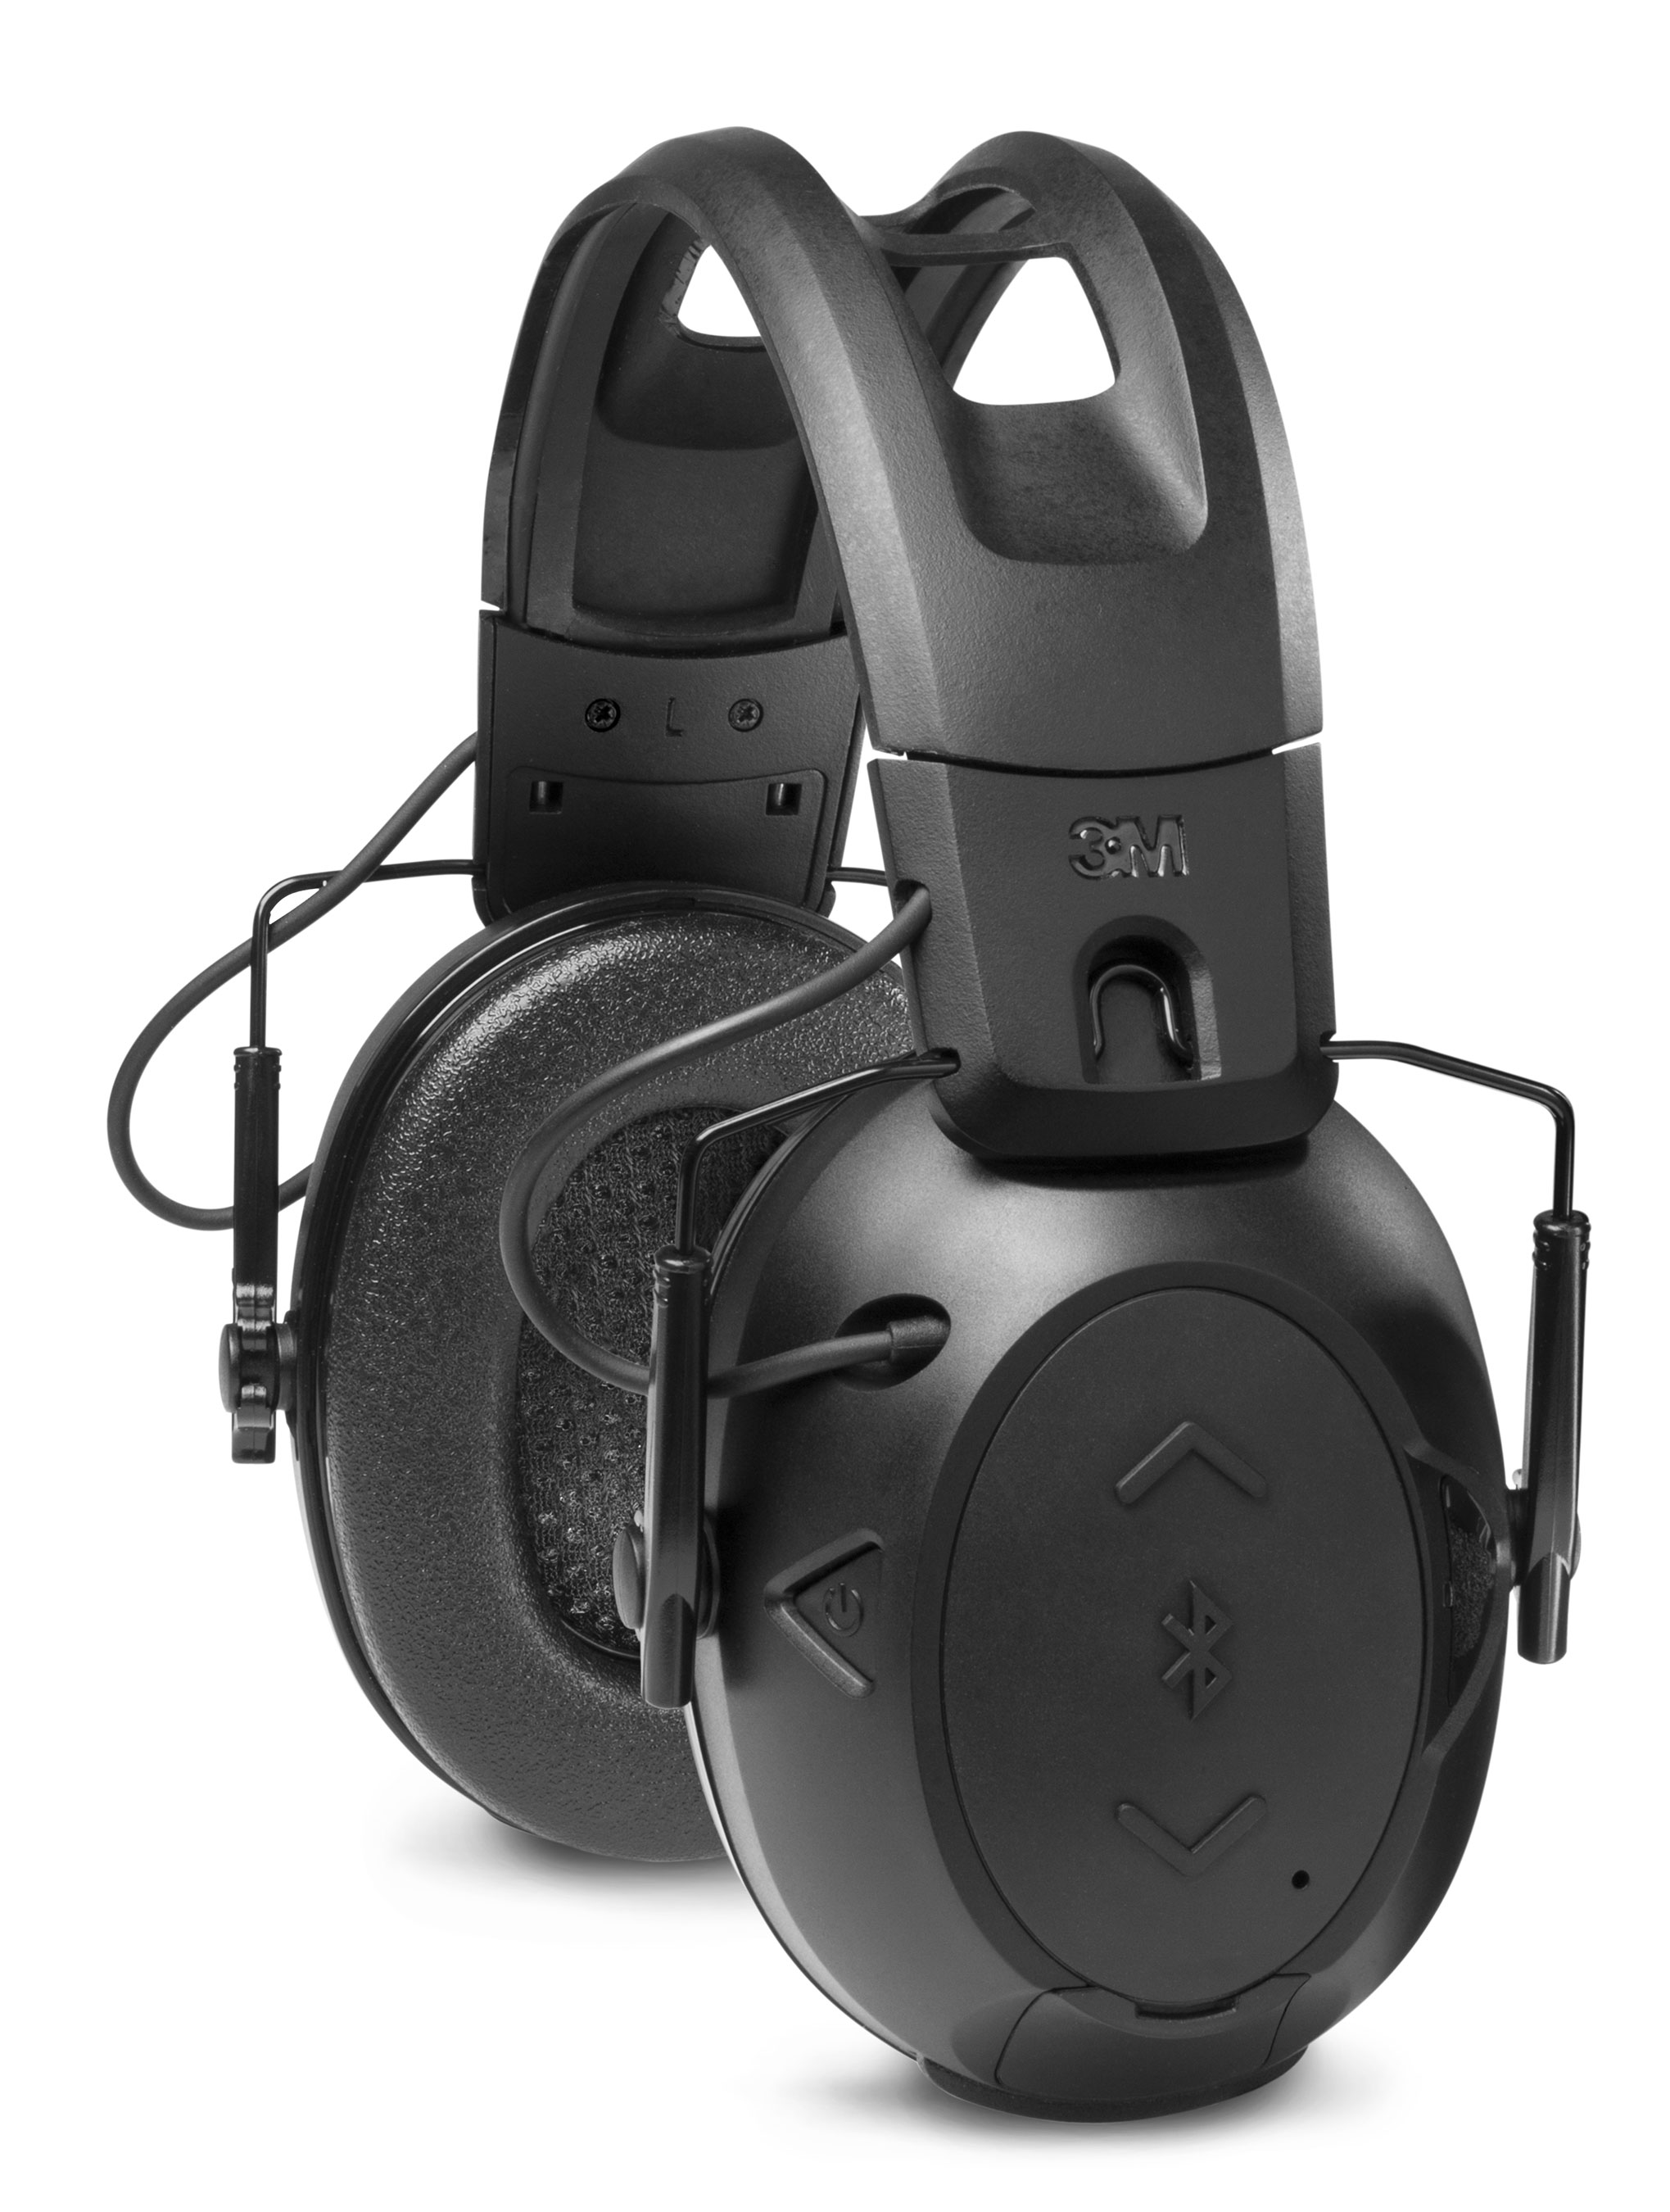 Peltor Sport Tactical 500 Electronic Hearing Protection Ear Muffs w/ Bluetooth 15% Off 4.4 Star Rating w/ Free SH